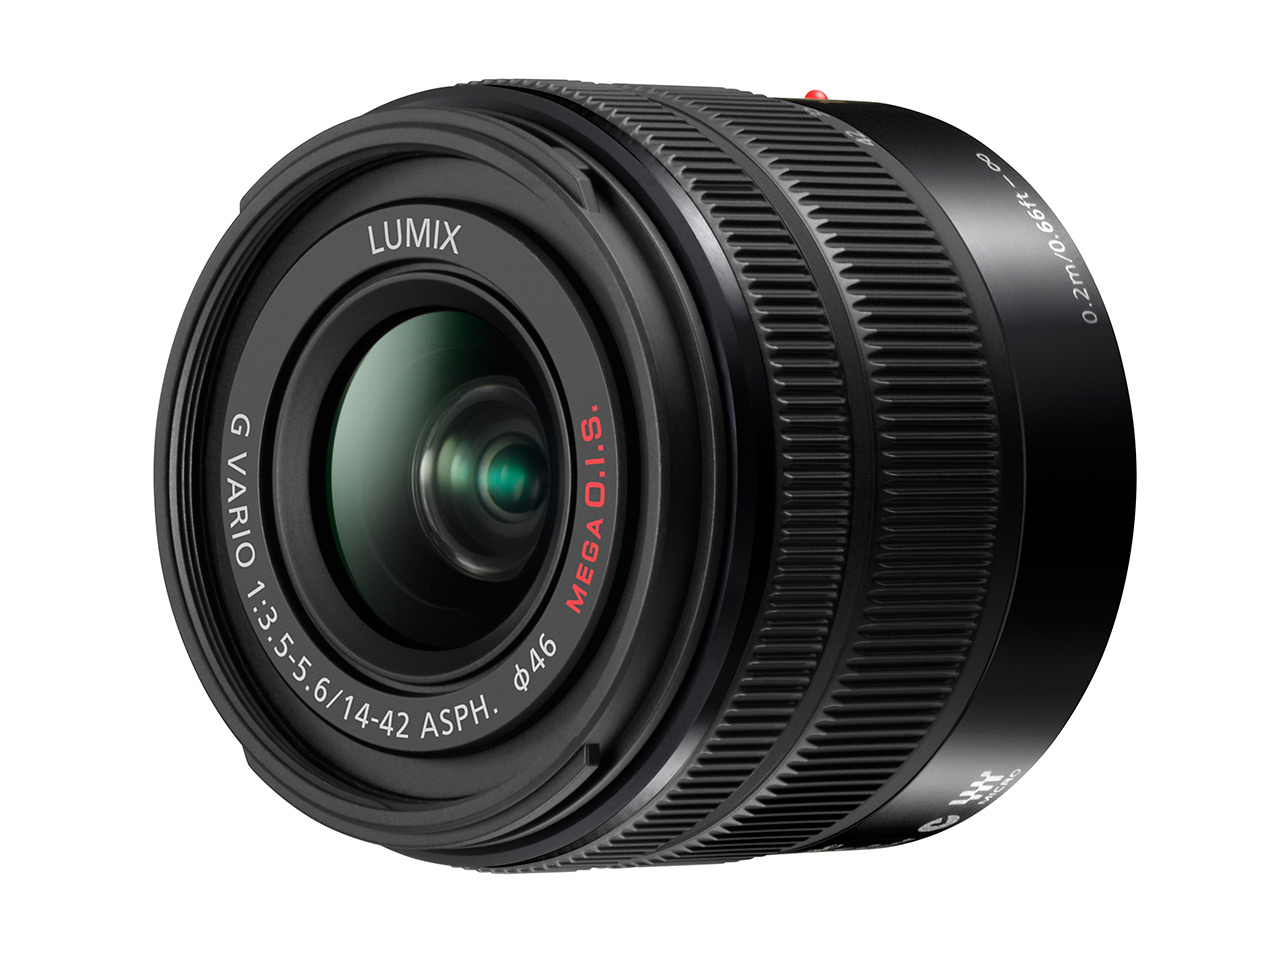 Panasonic Announces an Updated 14-42mm Kit Lens for Micro Four Thirds